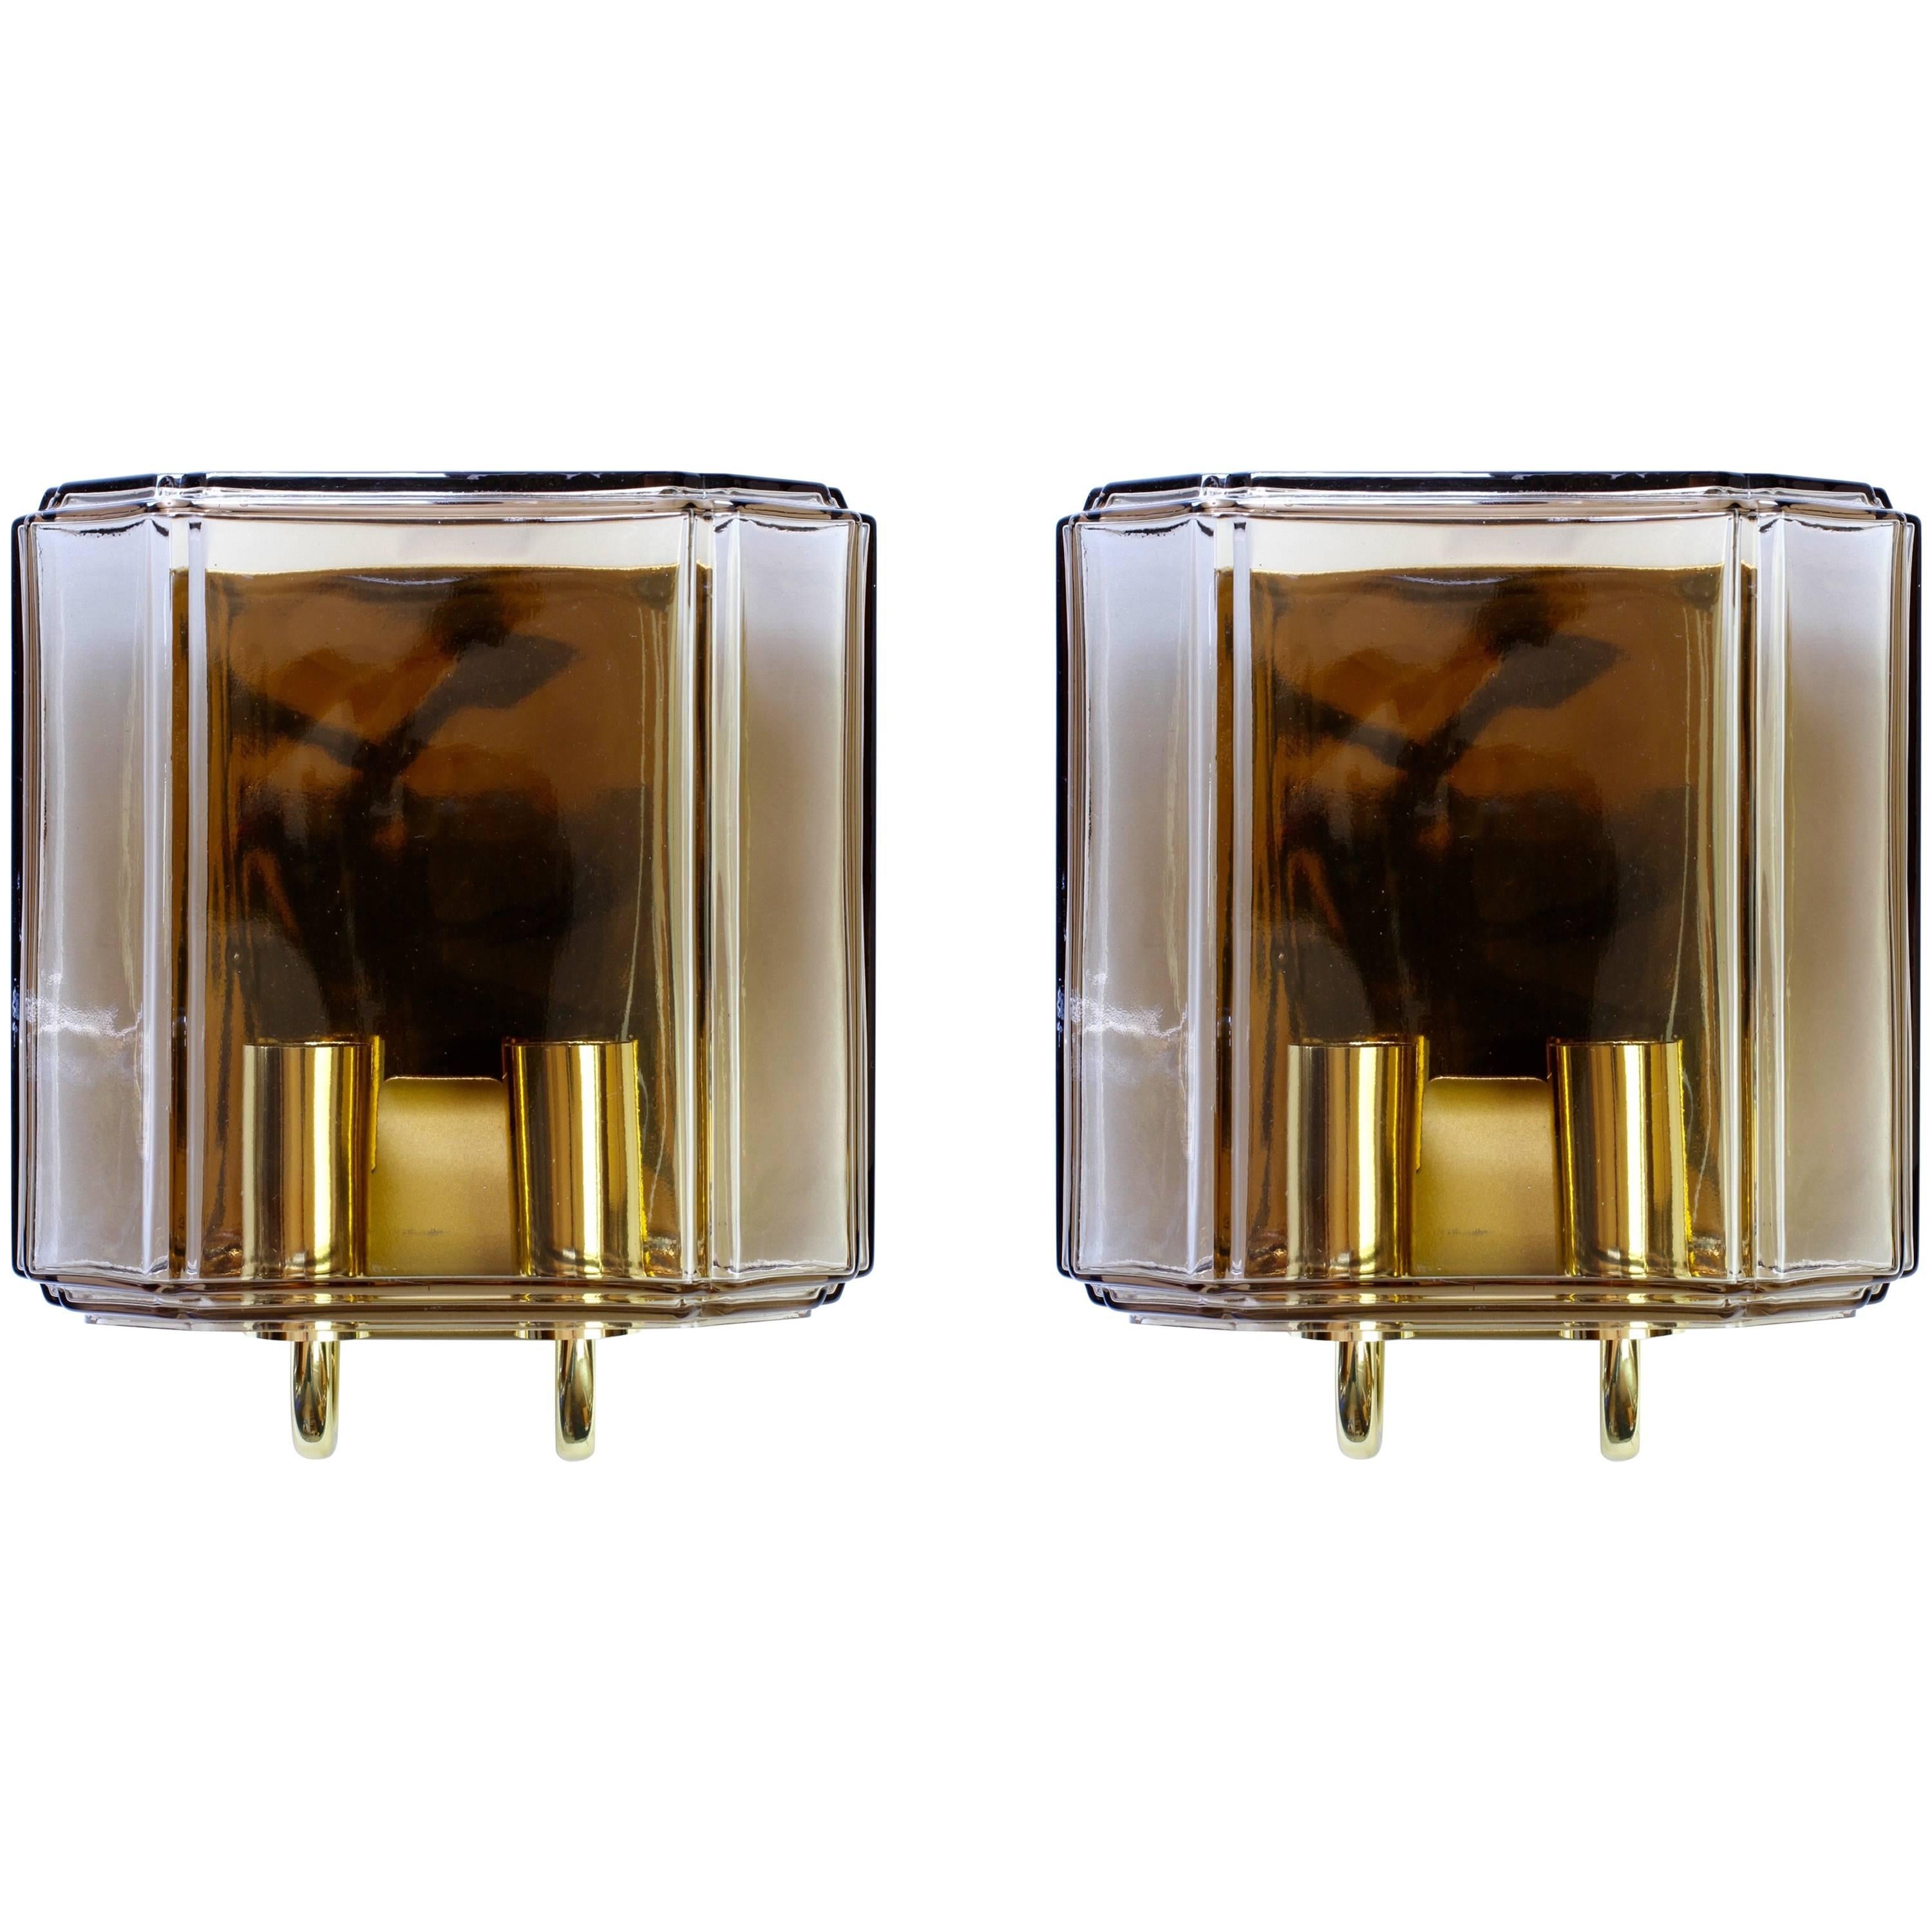 Vintage 1970s Pair of Smoked Topaz Glass Wall Mounted Sconces by Limburg Germany